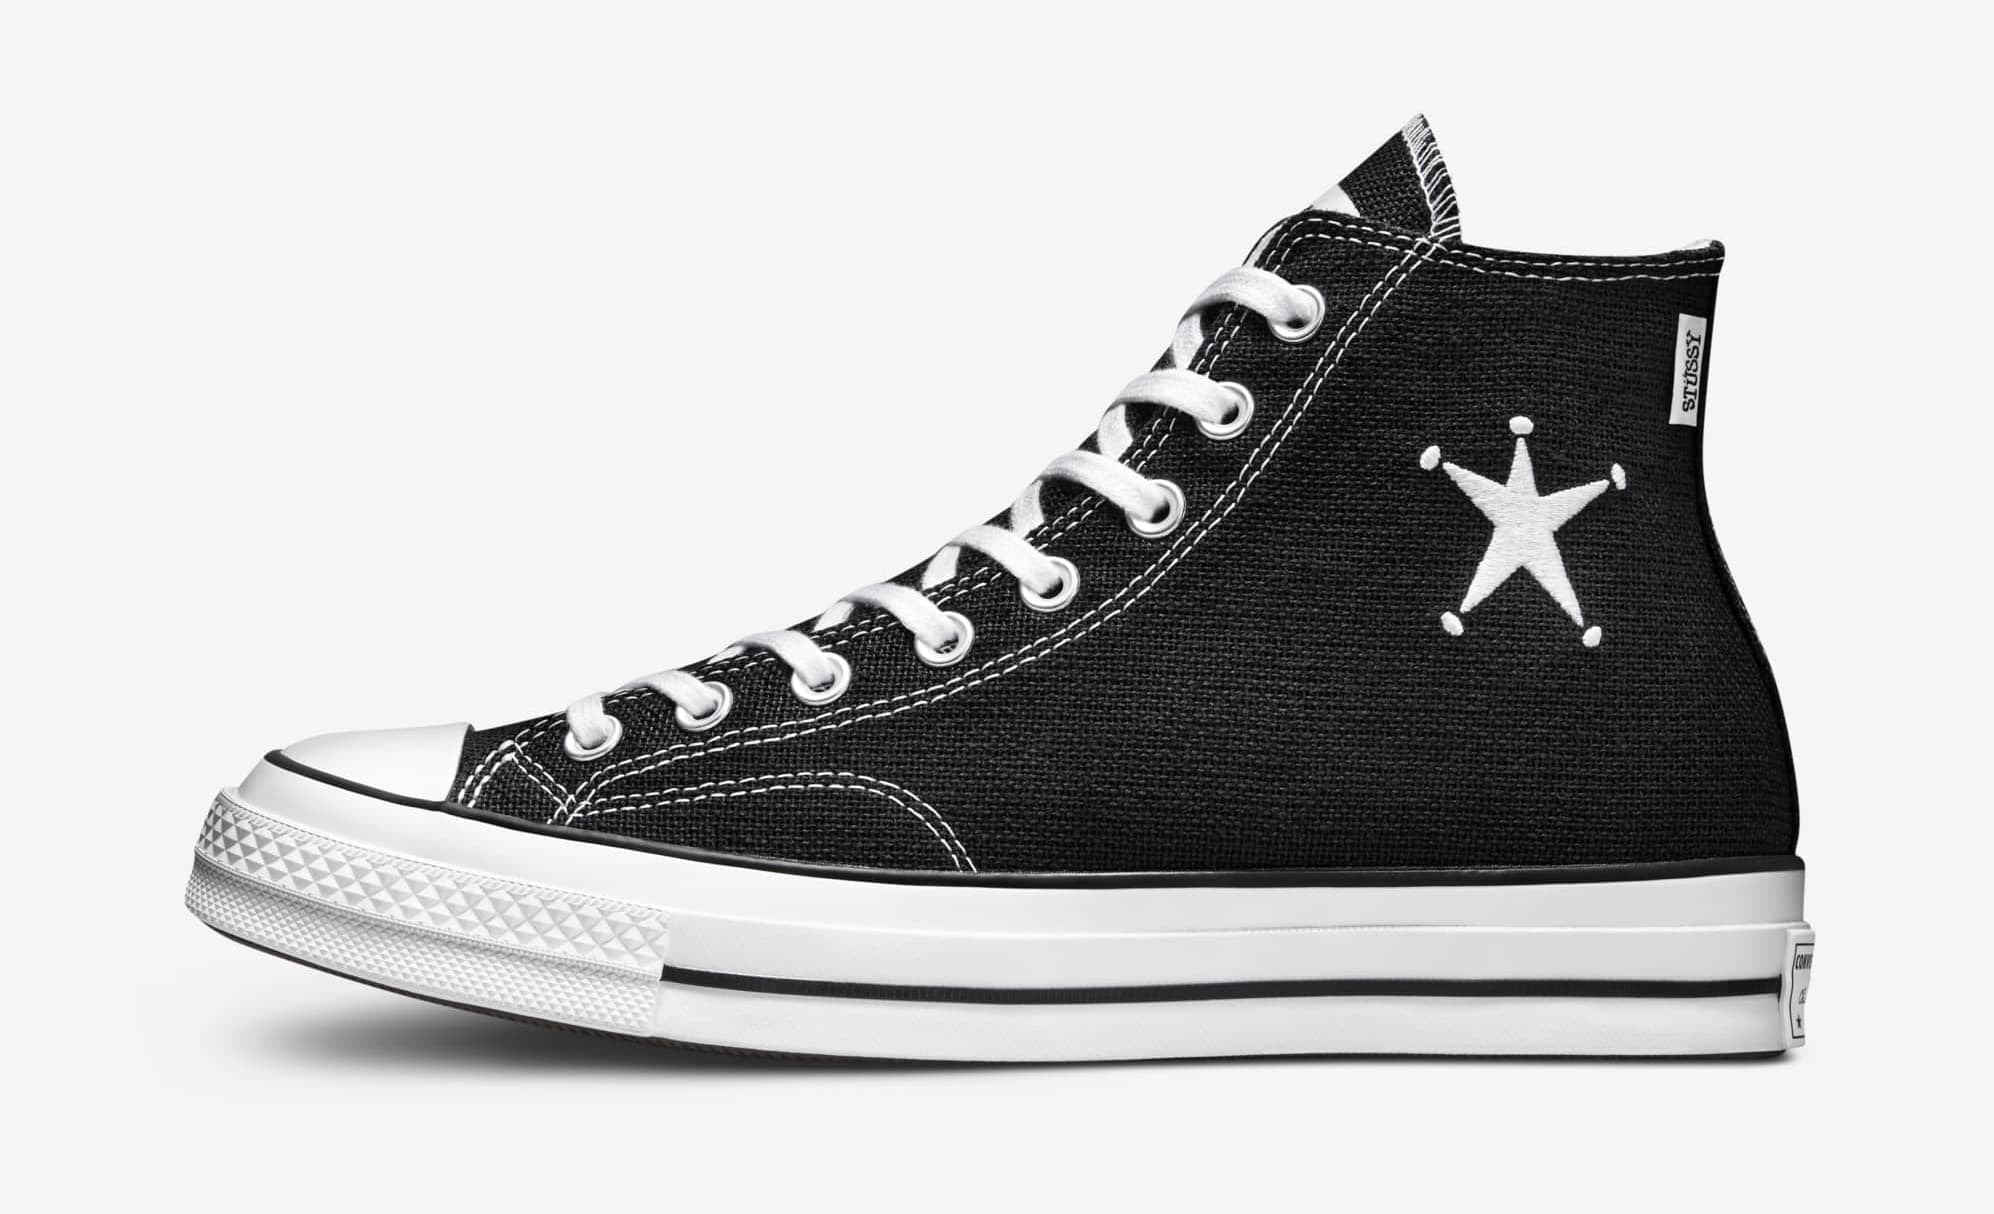 Stussy x Converse Chuck 70 Lateral